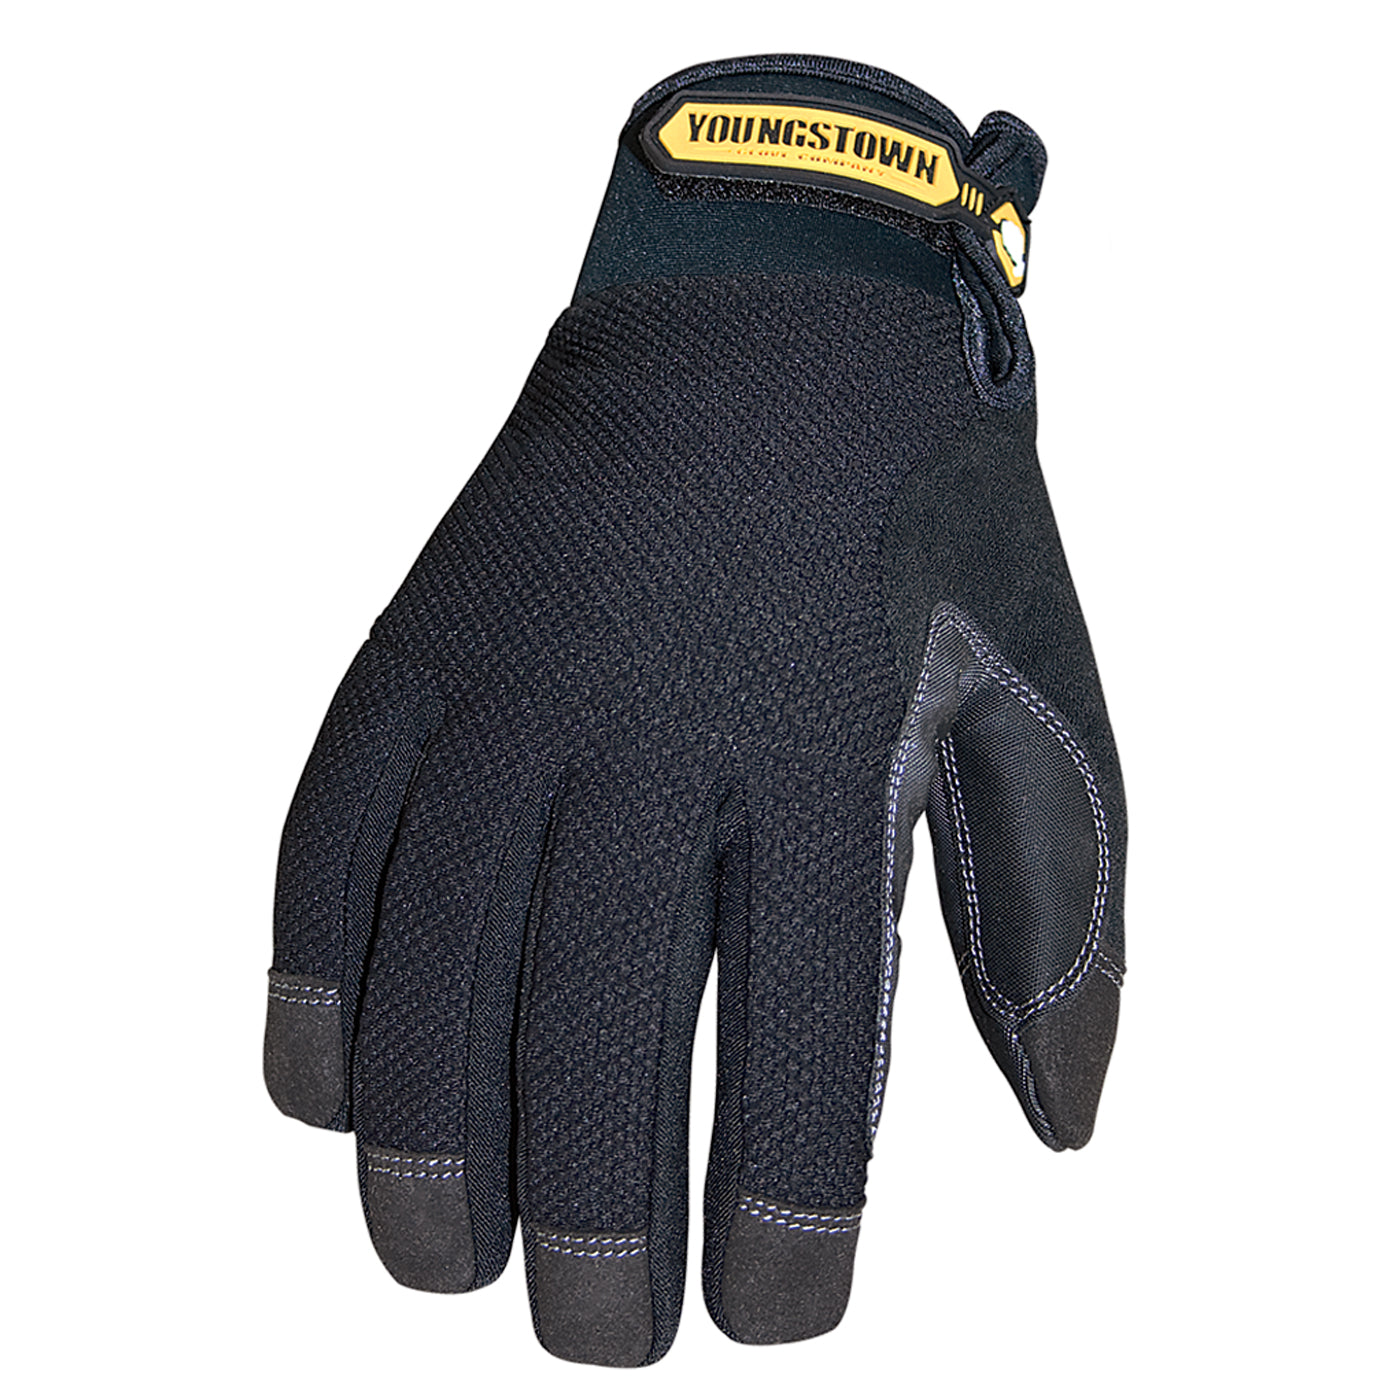 1 Pair Warm And Waterproof Cold-Proof Non-Slip Fishing Gloves